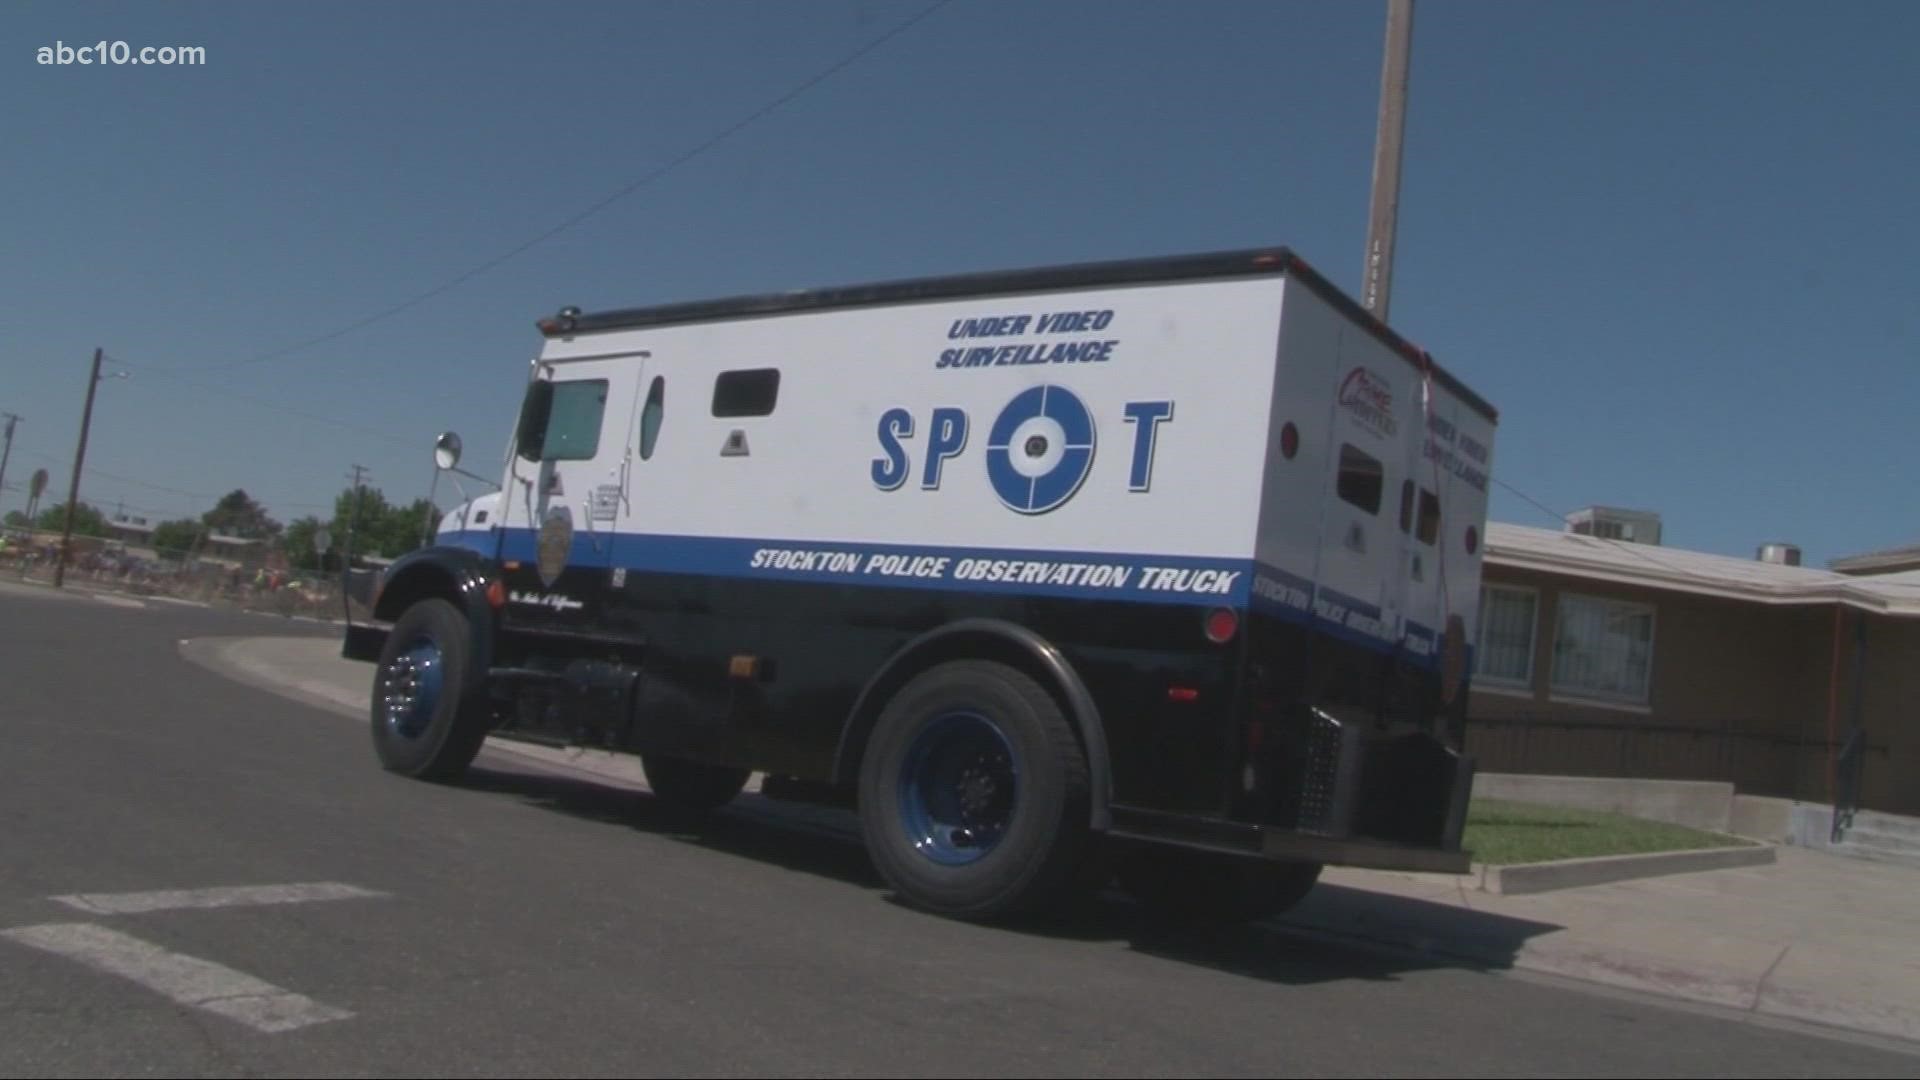 The Stockton Police Department just added a second Stockton Police Observation Truck to its crime-fighting arsenal.